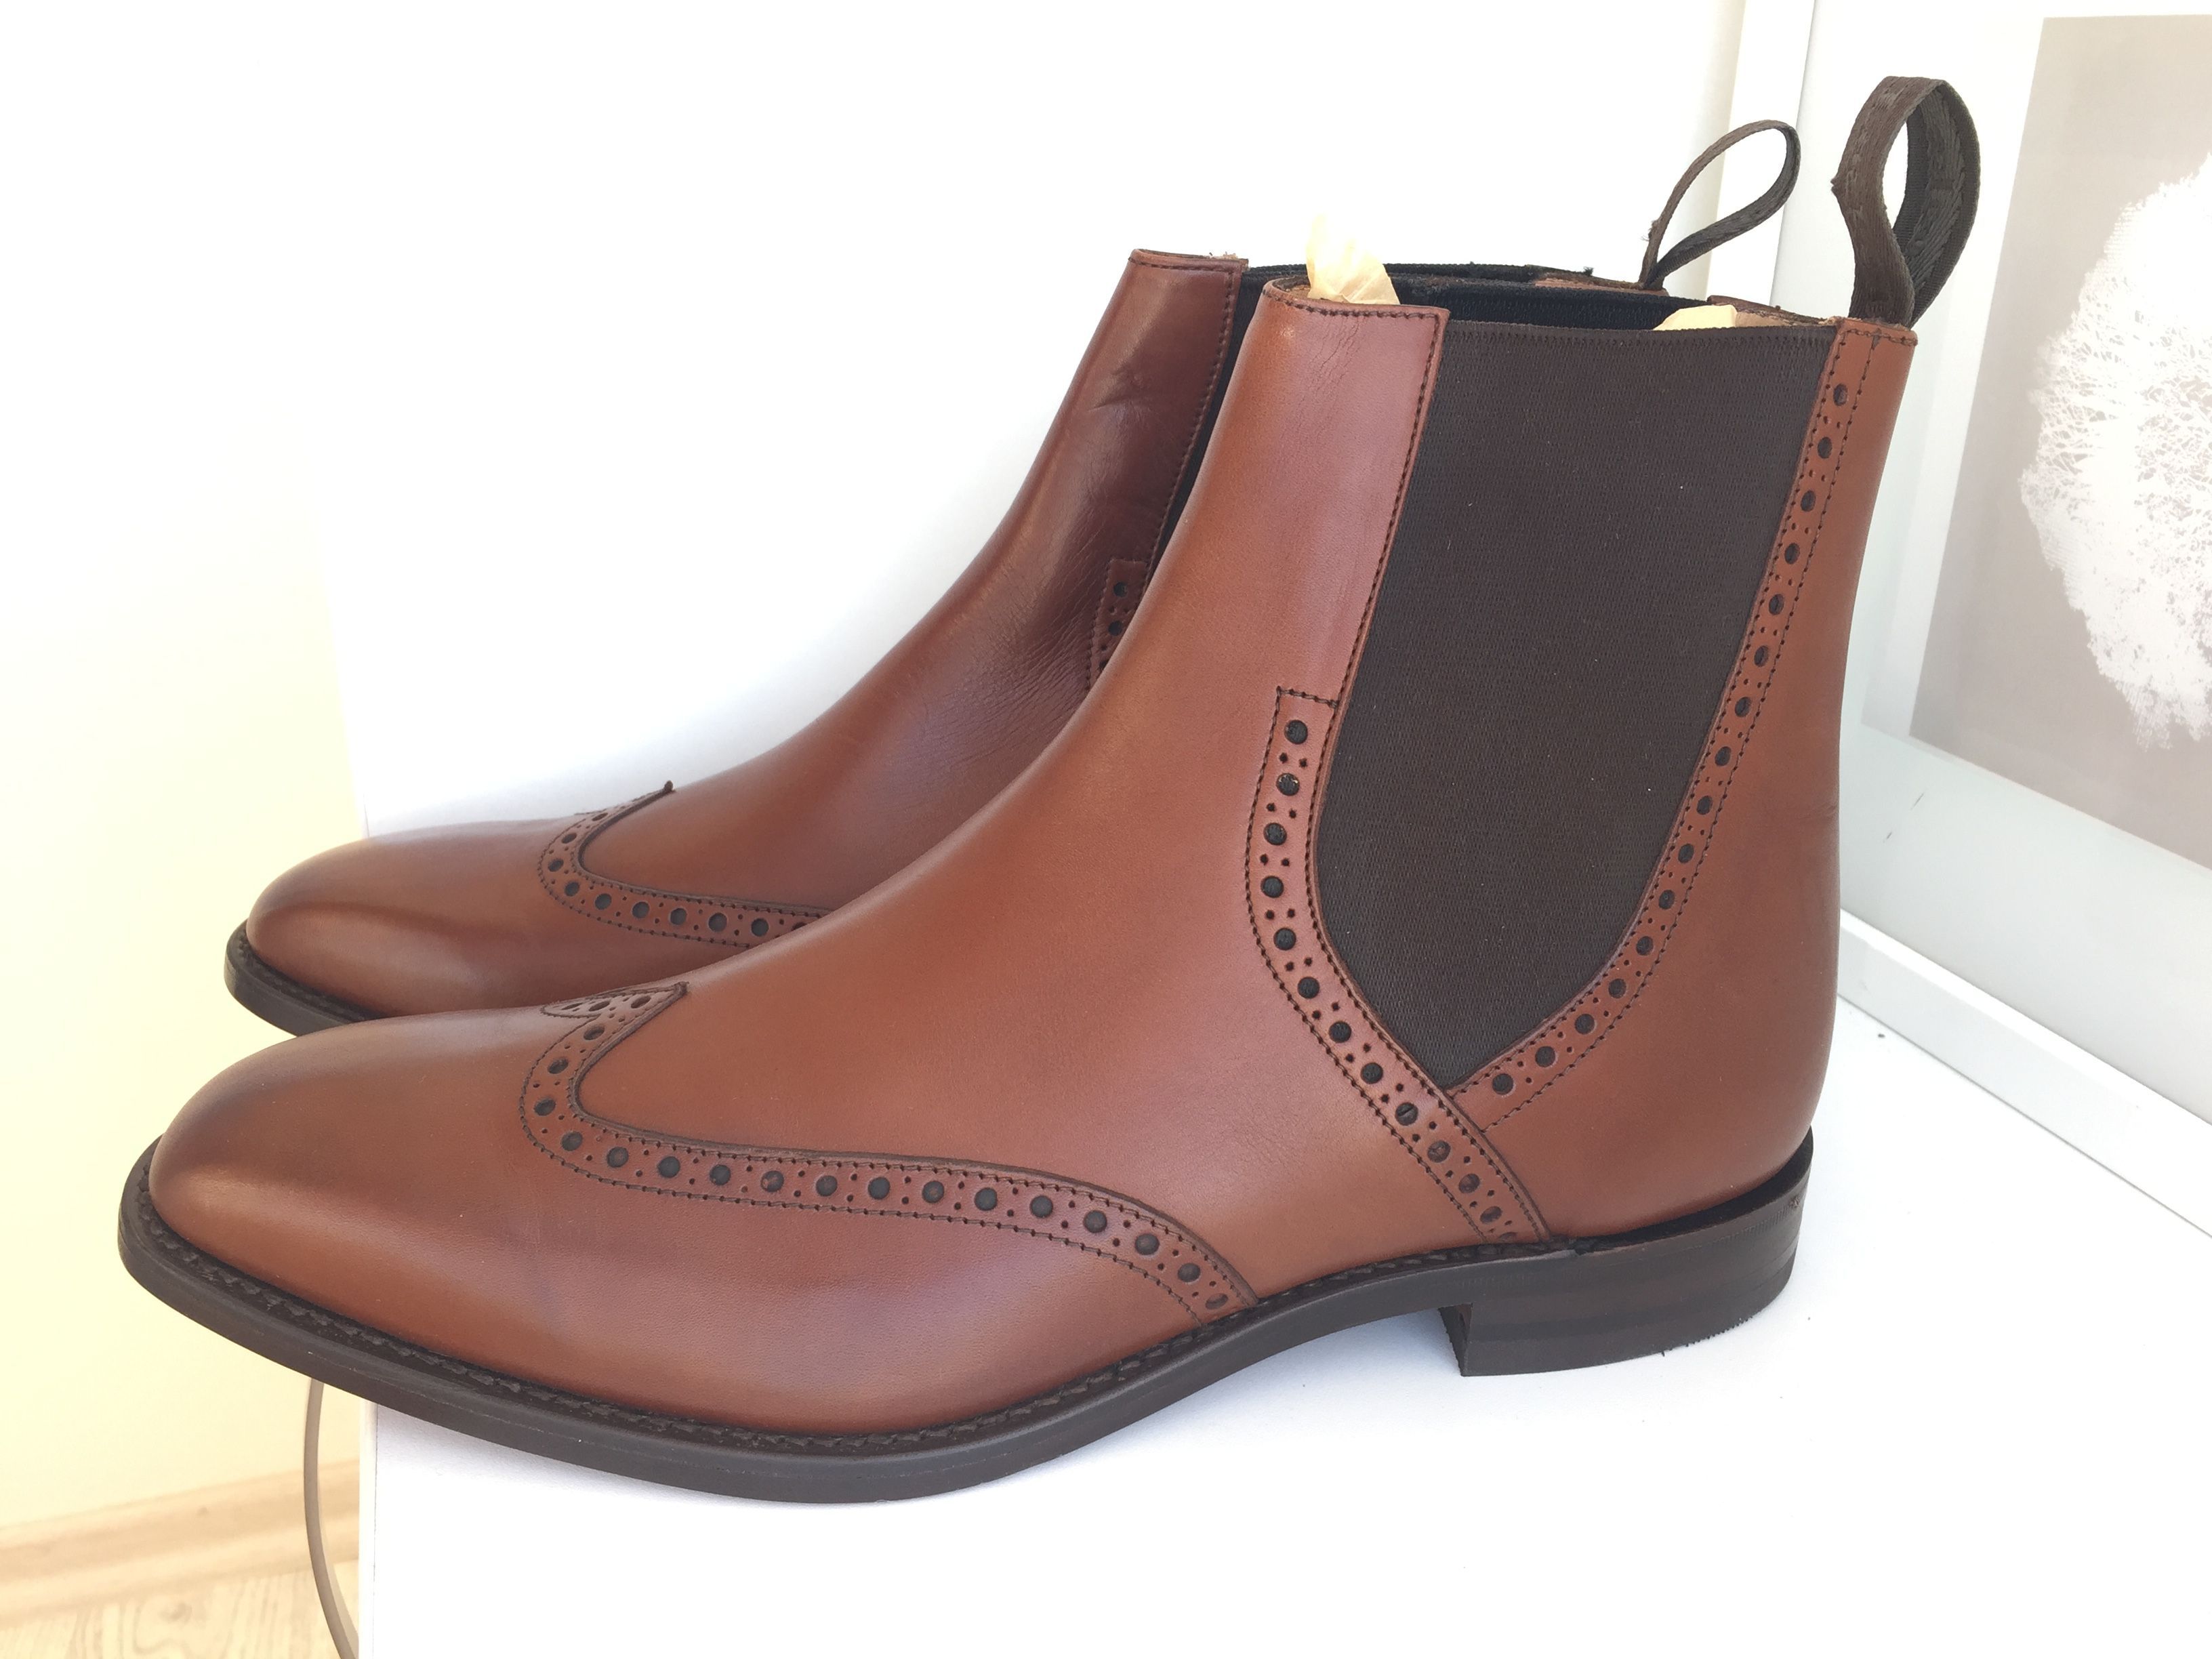 How good are Magnanni shoes? | Styleforum